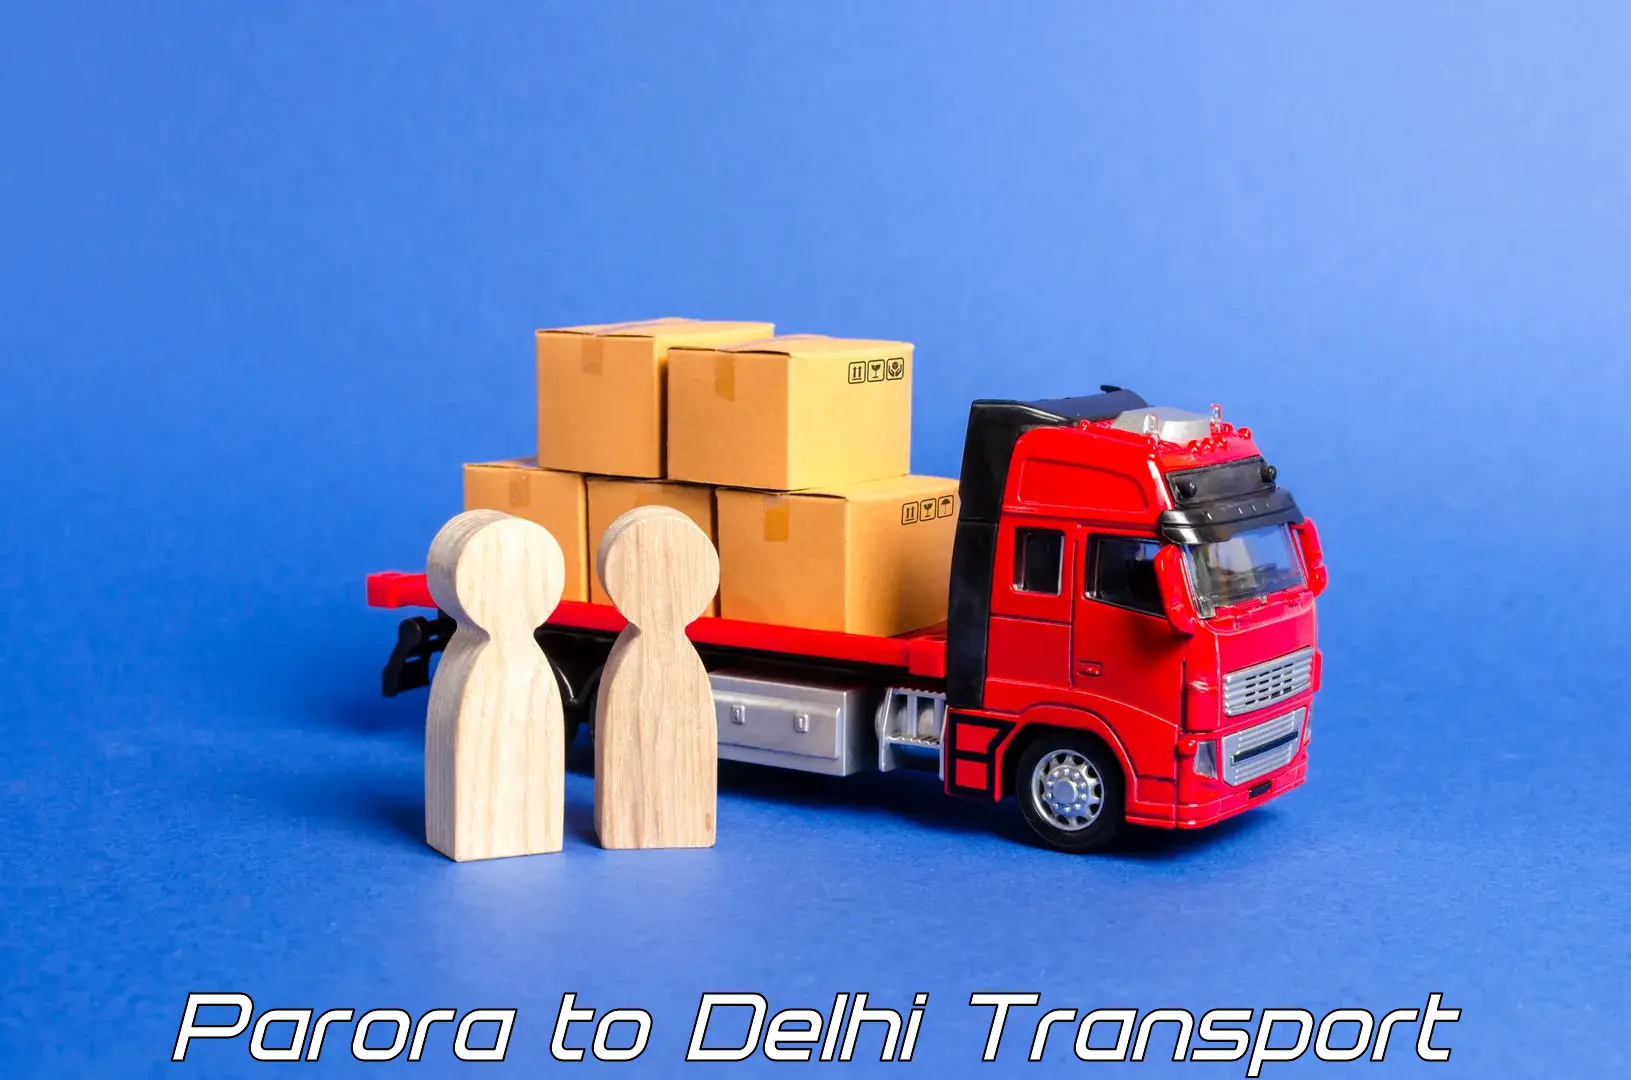 Package delivery services Parora to University of Delhi